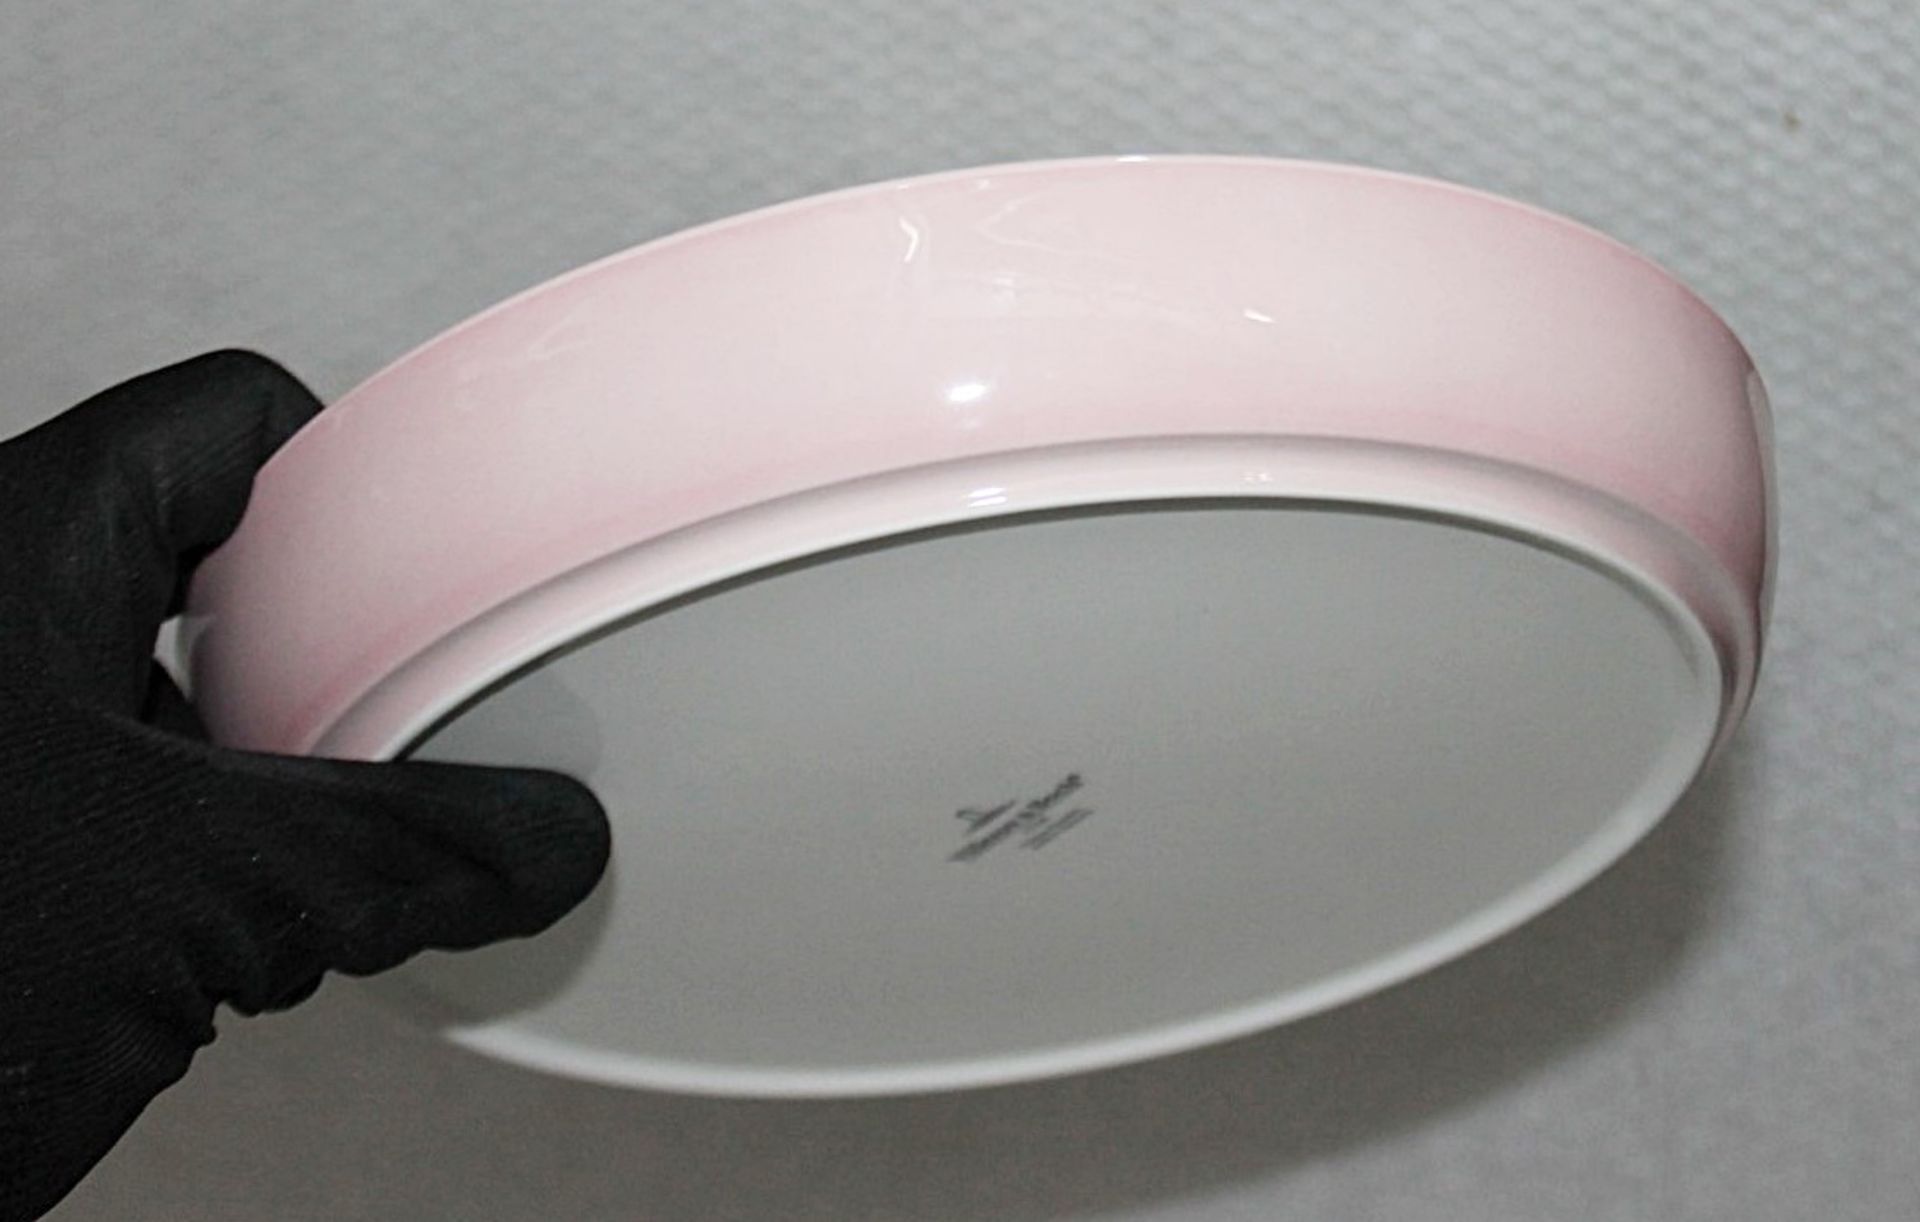 1 x VILLEROY & BOCH Porcelain Universial Flat Bowl With A Pink Band- Dimensions: ø23.5 x H3.7cm - - Image 4 of 5